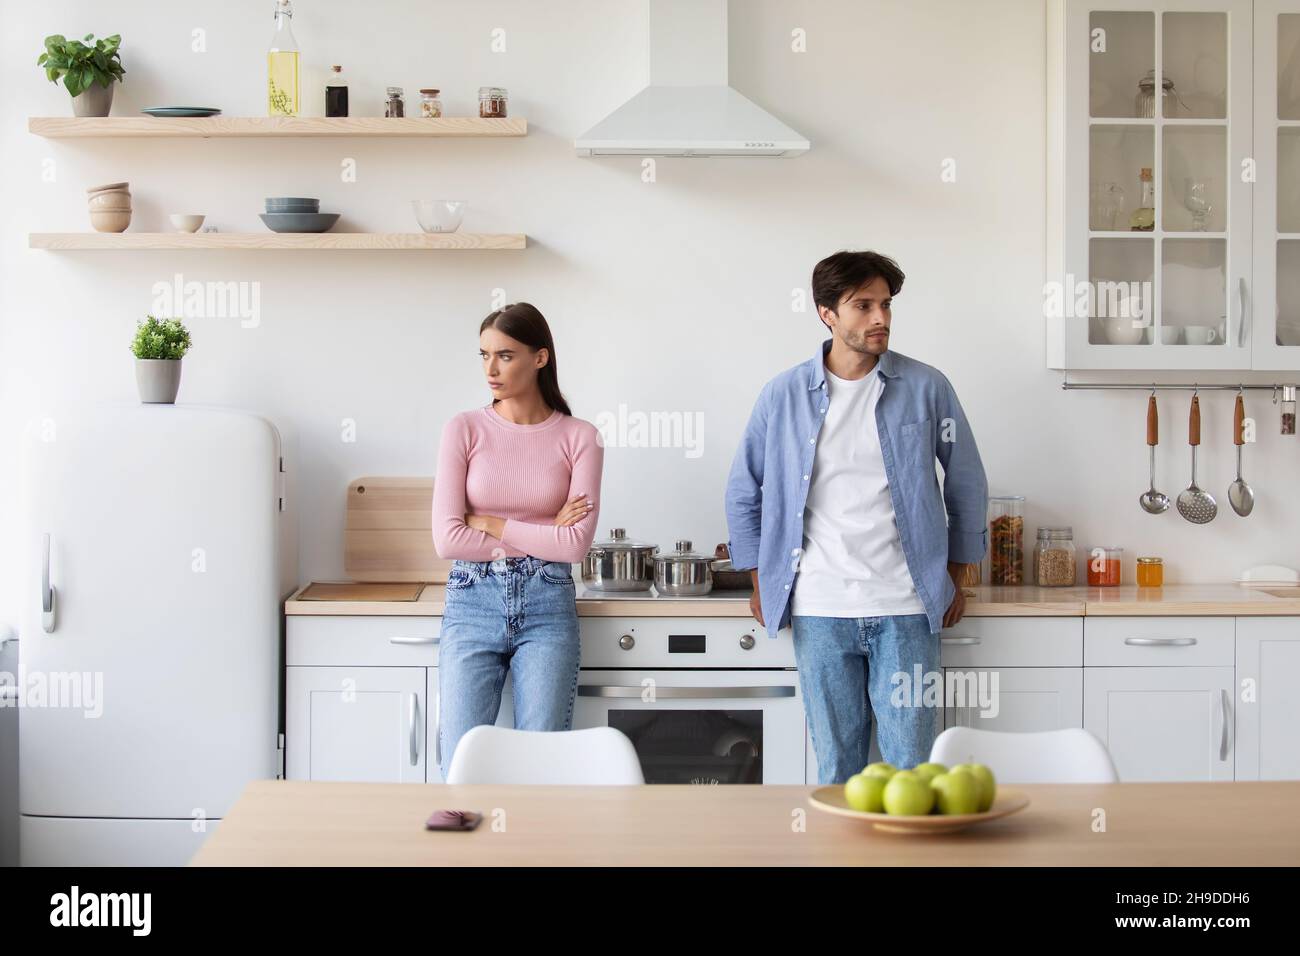 Offended young man ignore lady on kitchen interior. Negative emotions, relationship problems at home Stock Photo